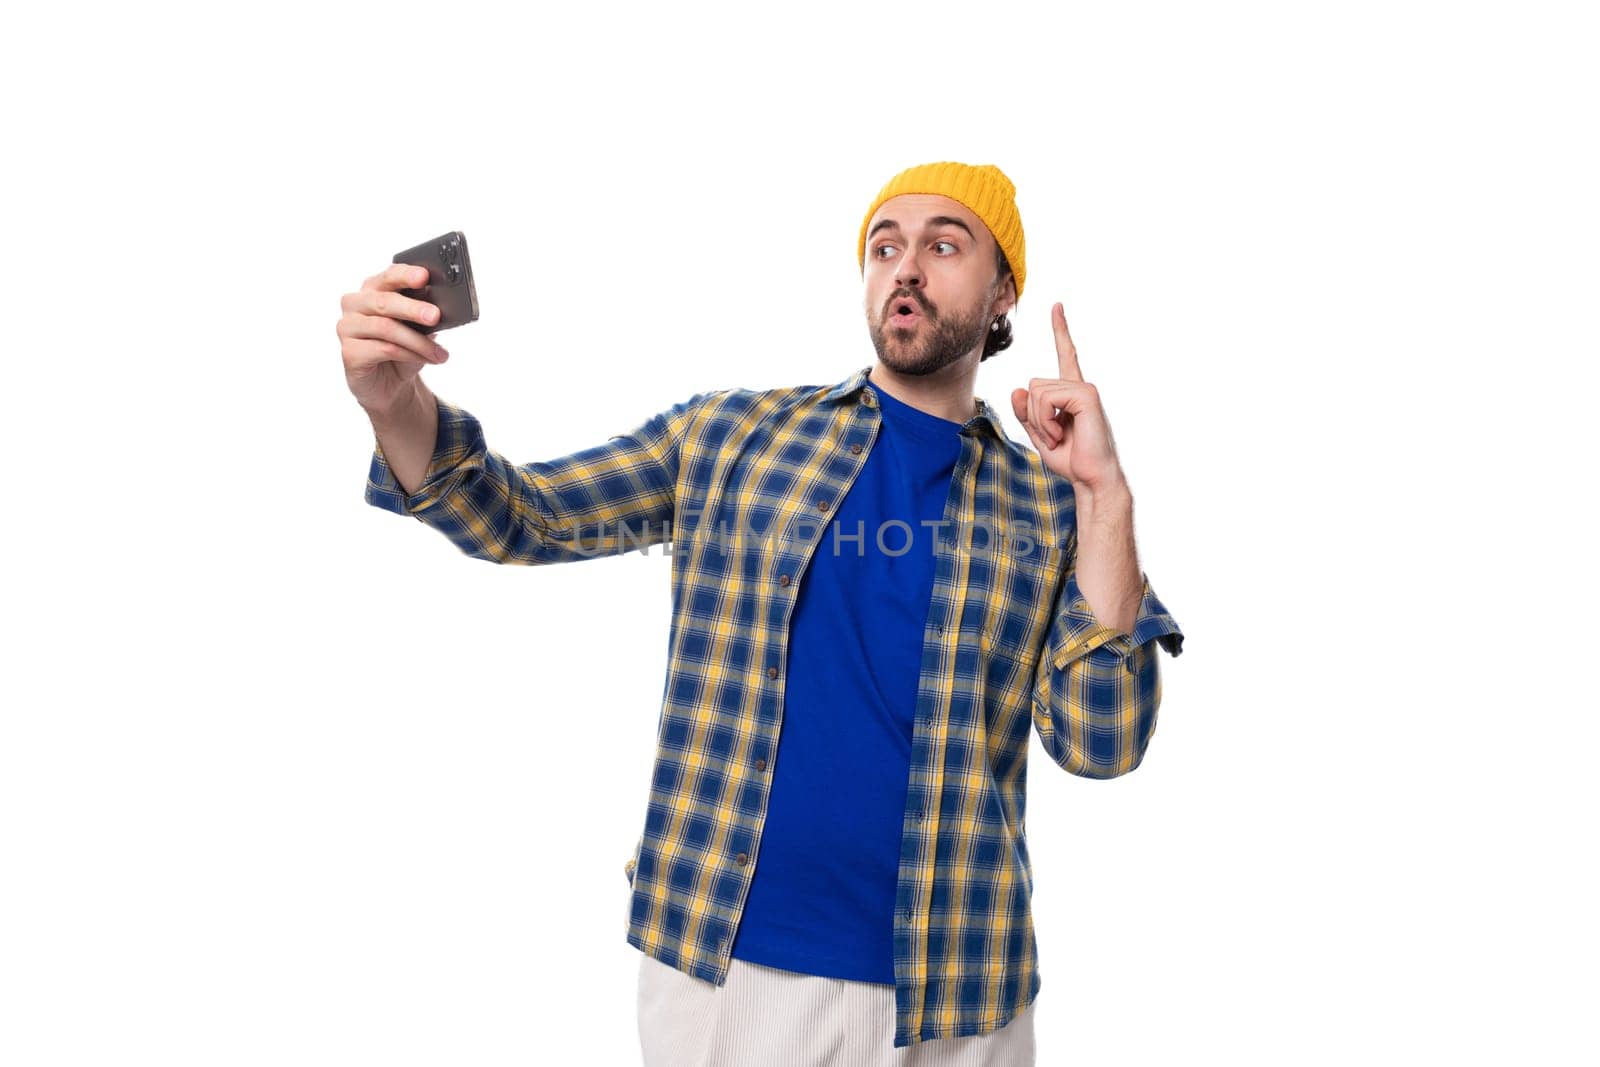 young european brunette man with a beard and mustache dressed in a yellow cap and a blue shirt takes a selfie on a white background with copy space.